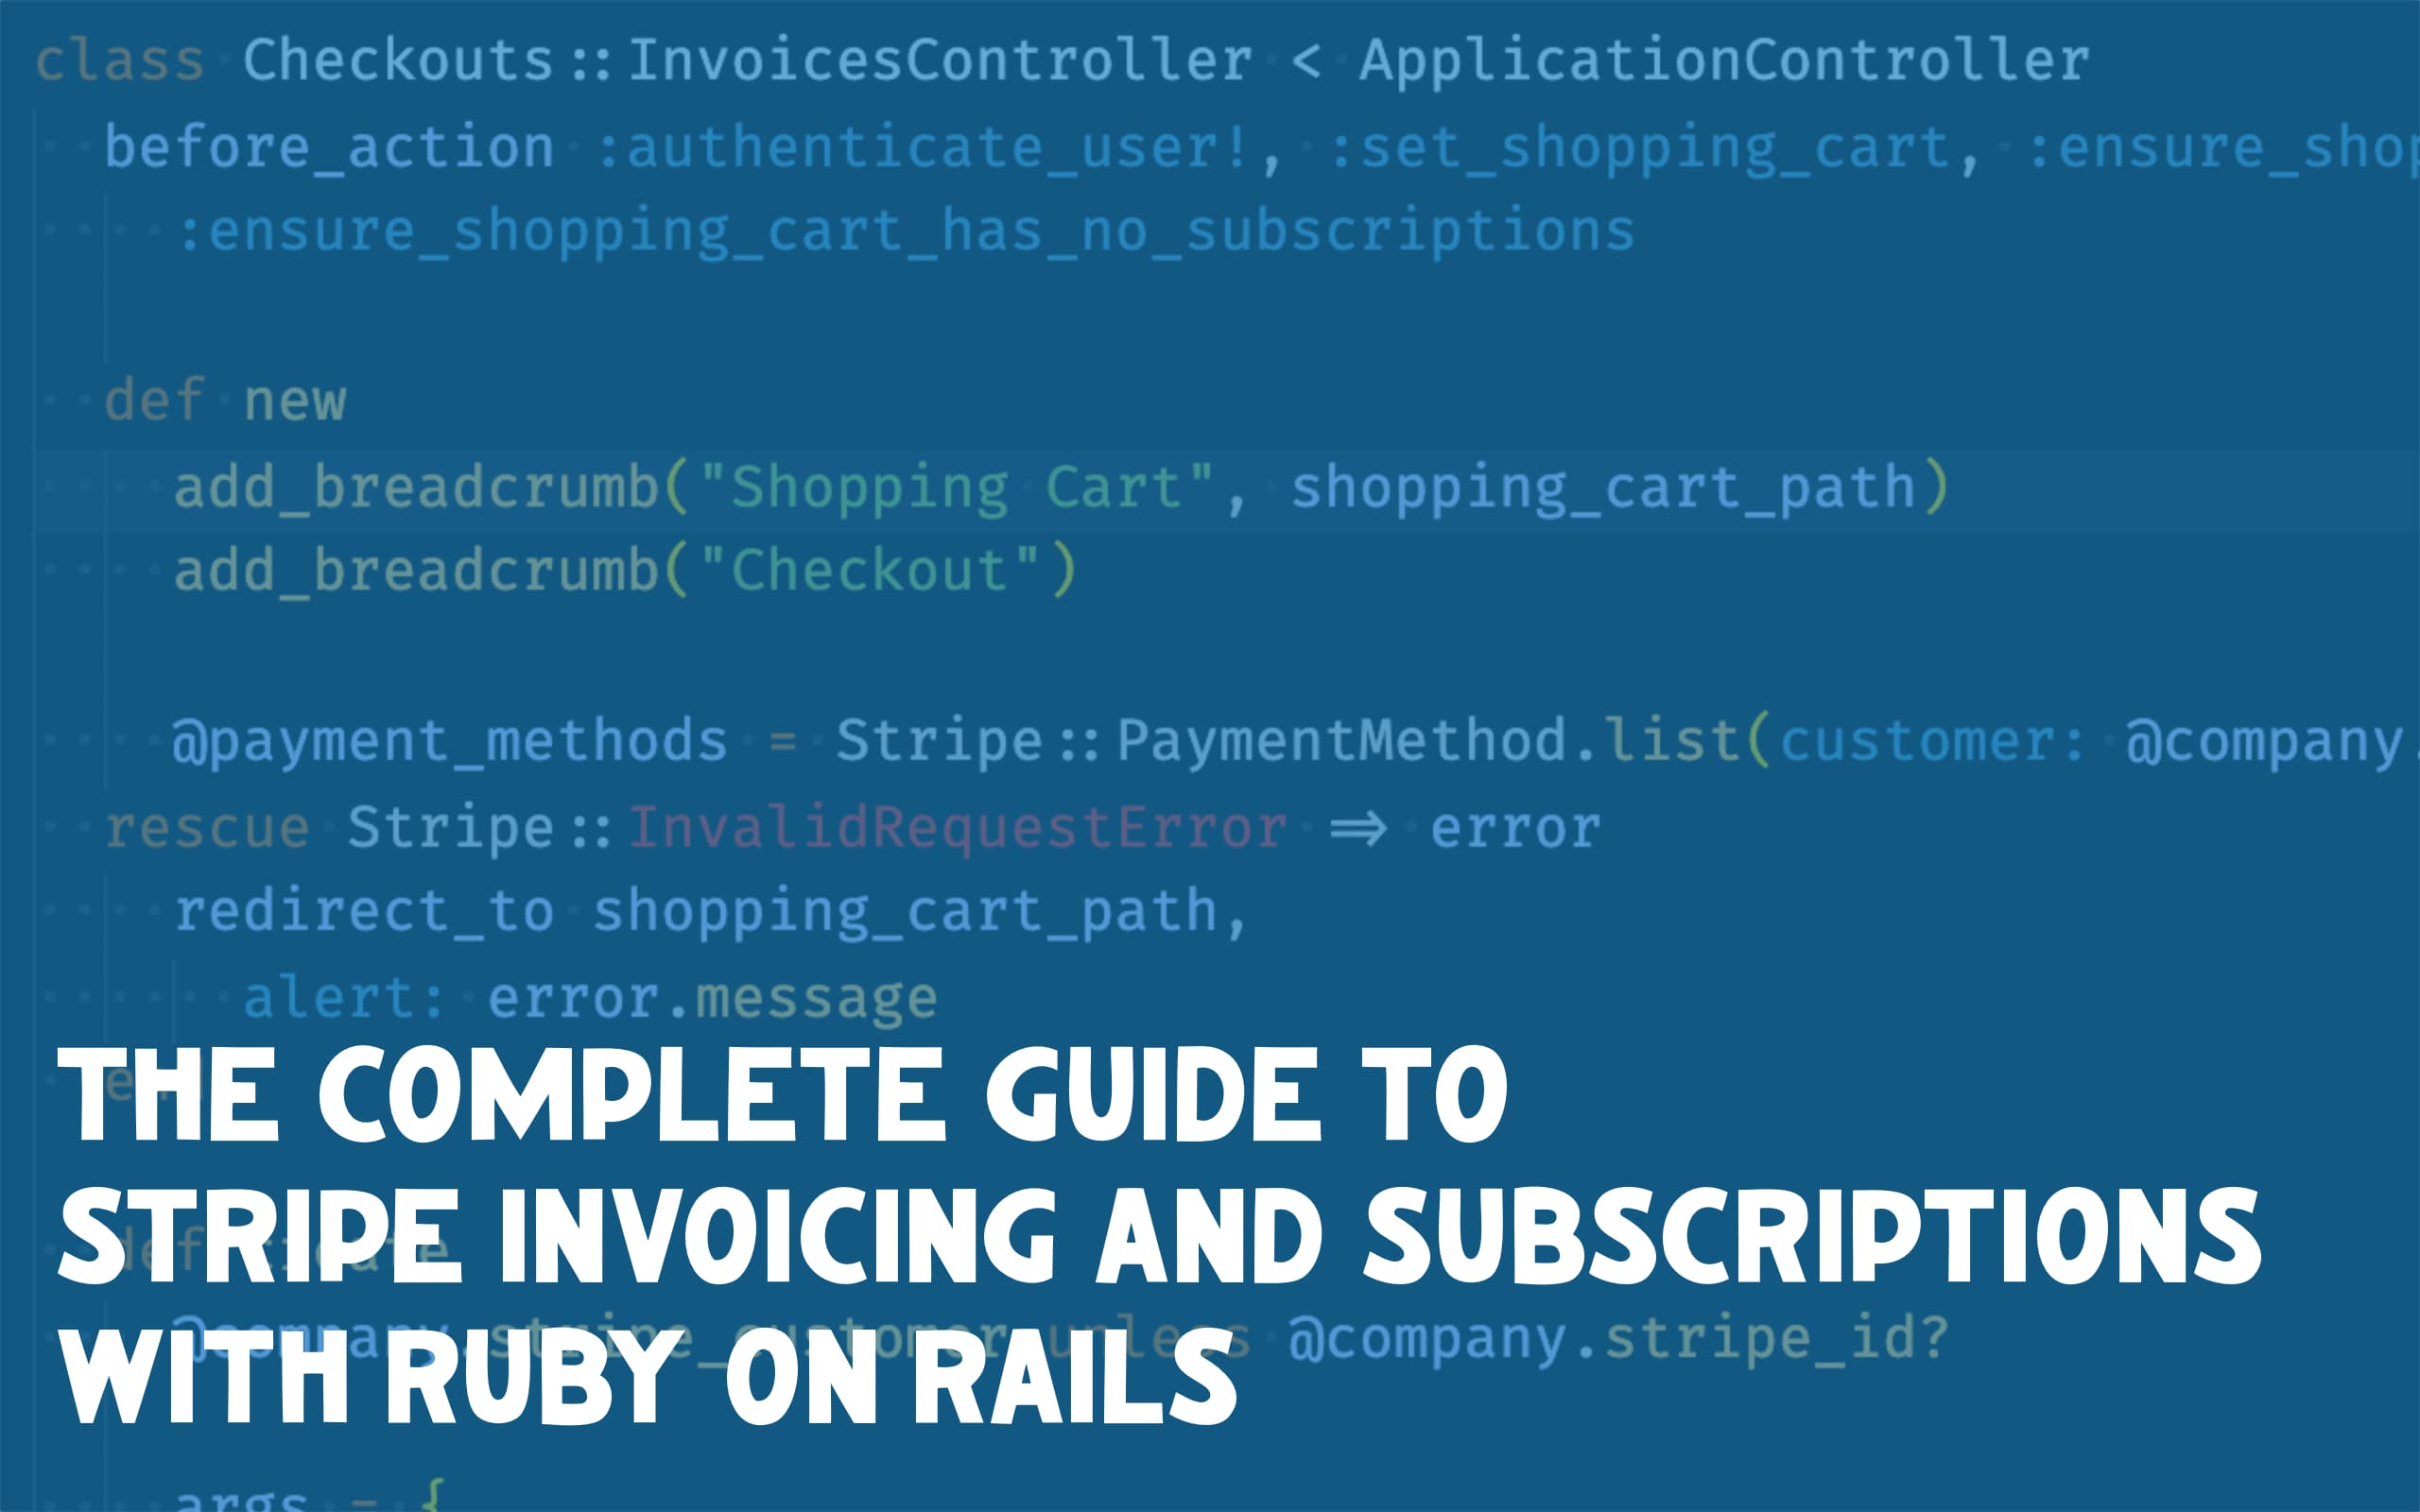 The Complete Guide to Stripe Invoicing and Subscriptions with Ruby on Rails